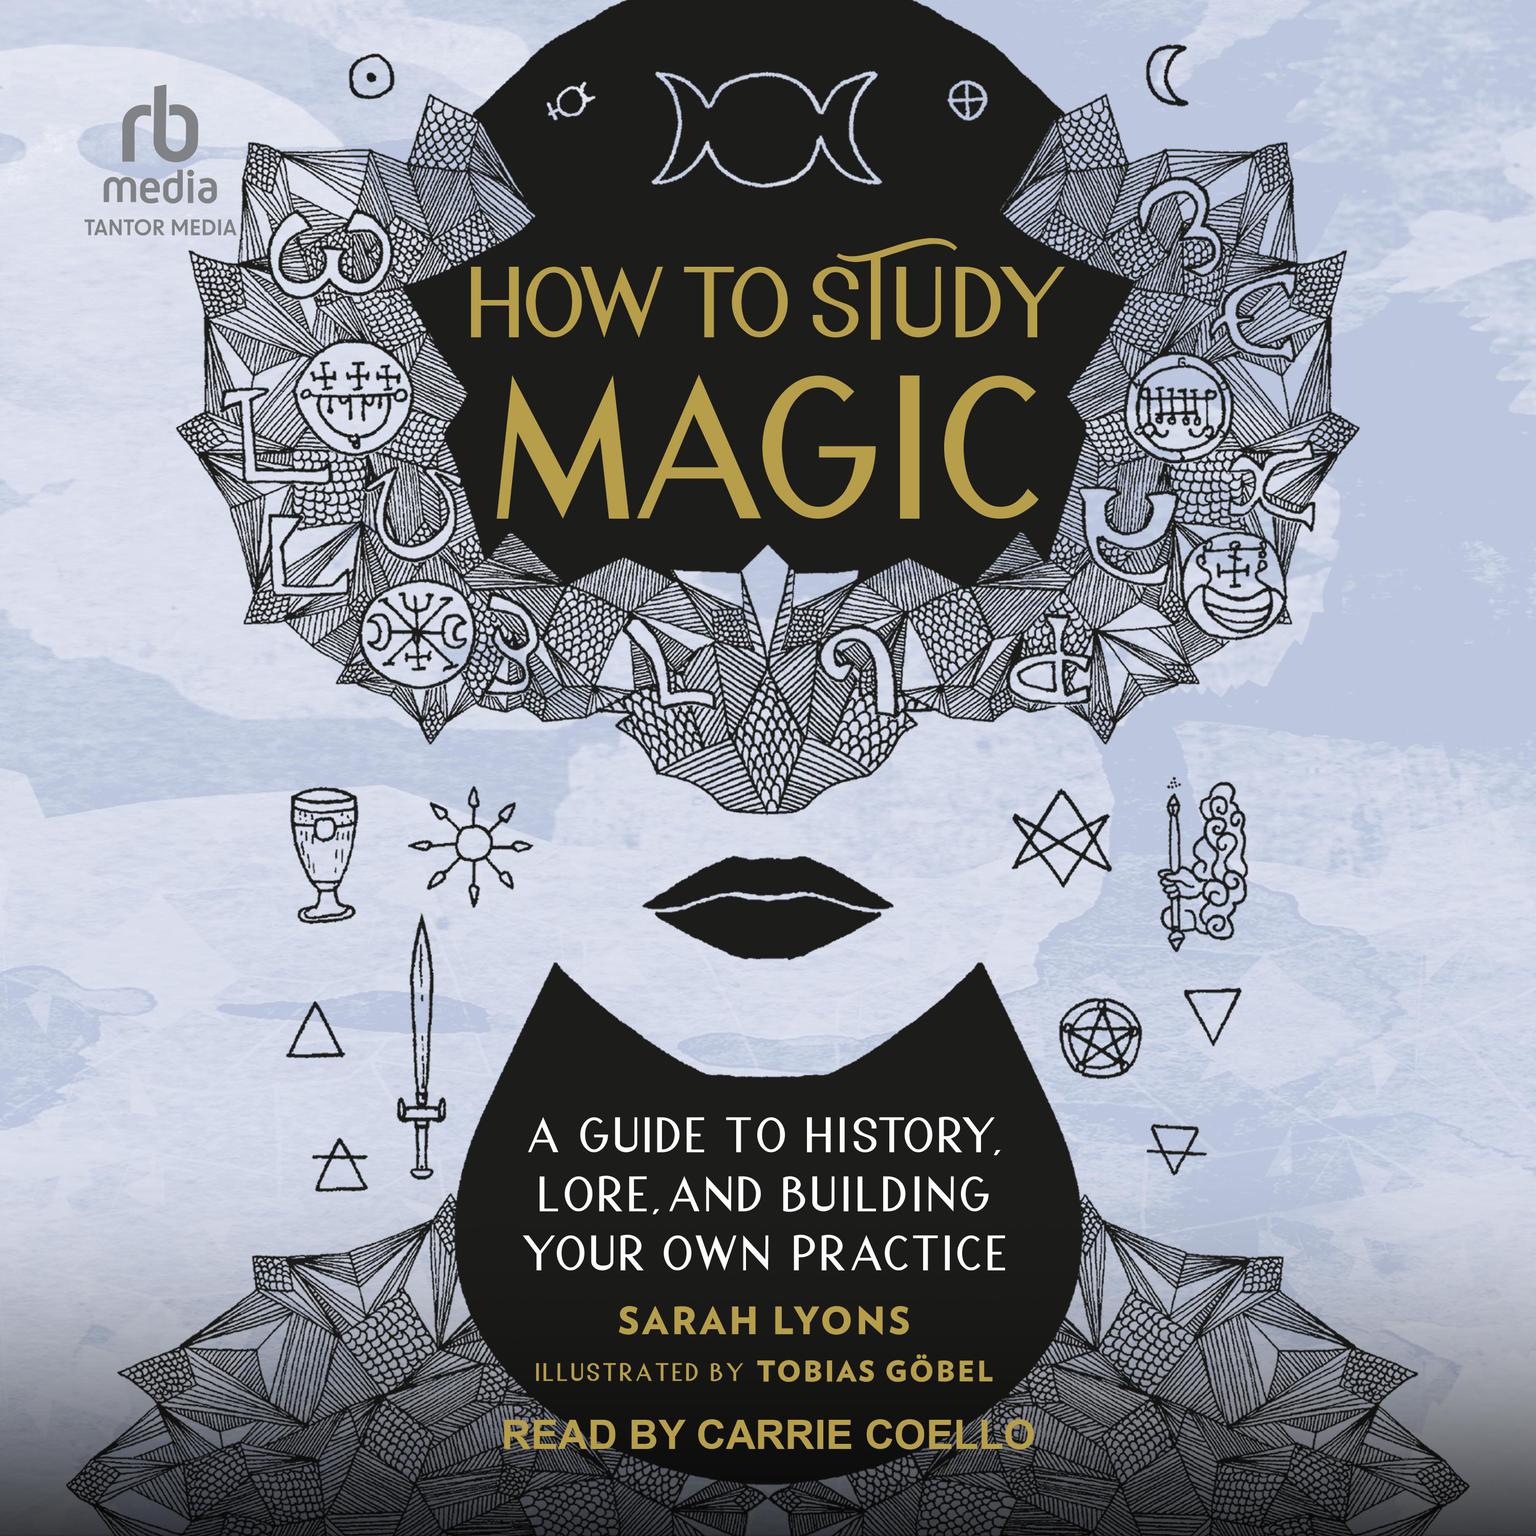 How to Study Magic: A Guide to History, Lore, and Building Your Own Practice Audiobook, by Sarah Lyons